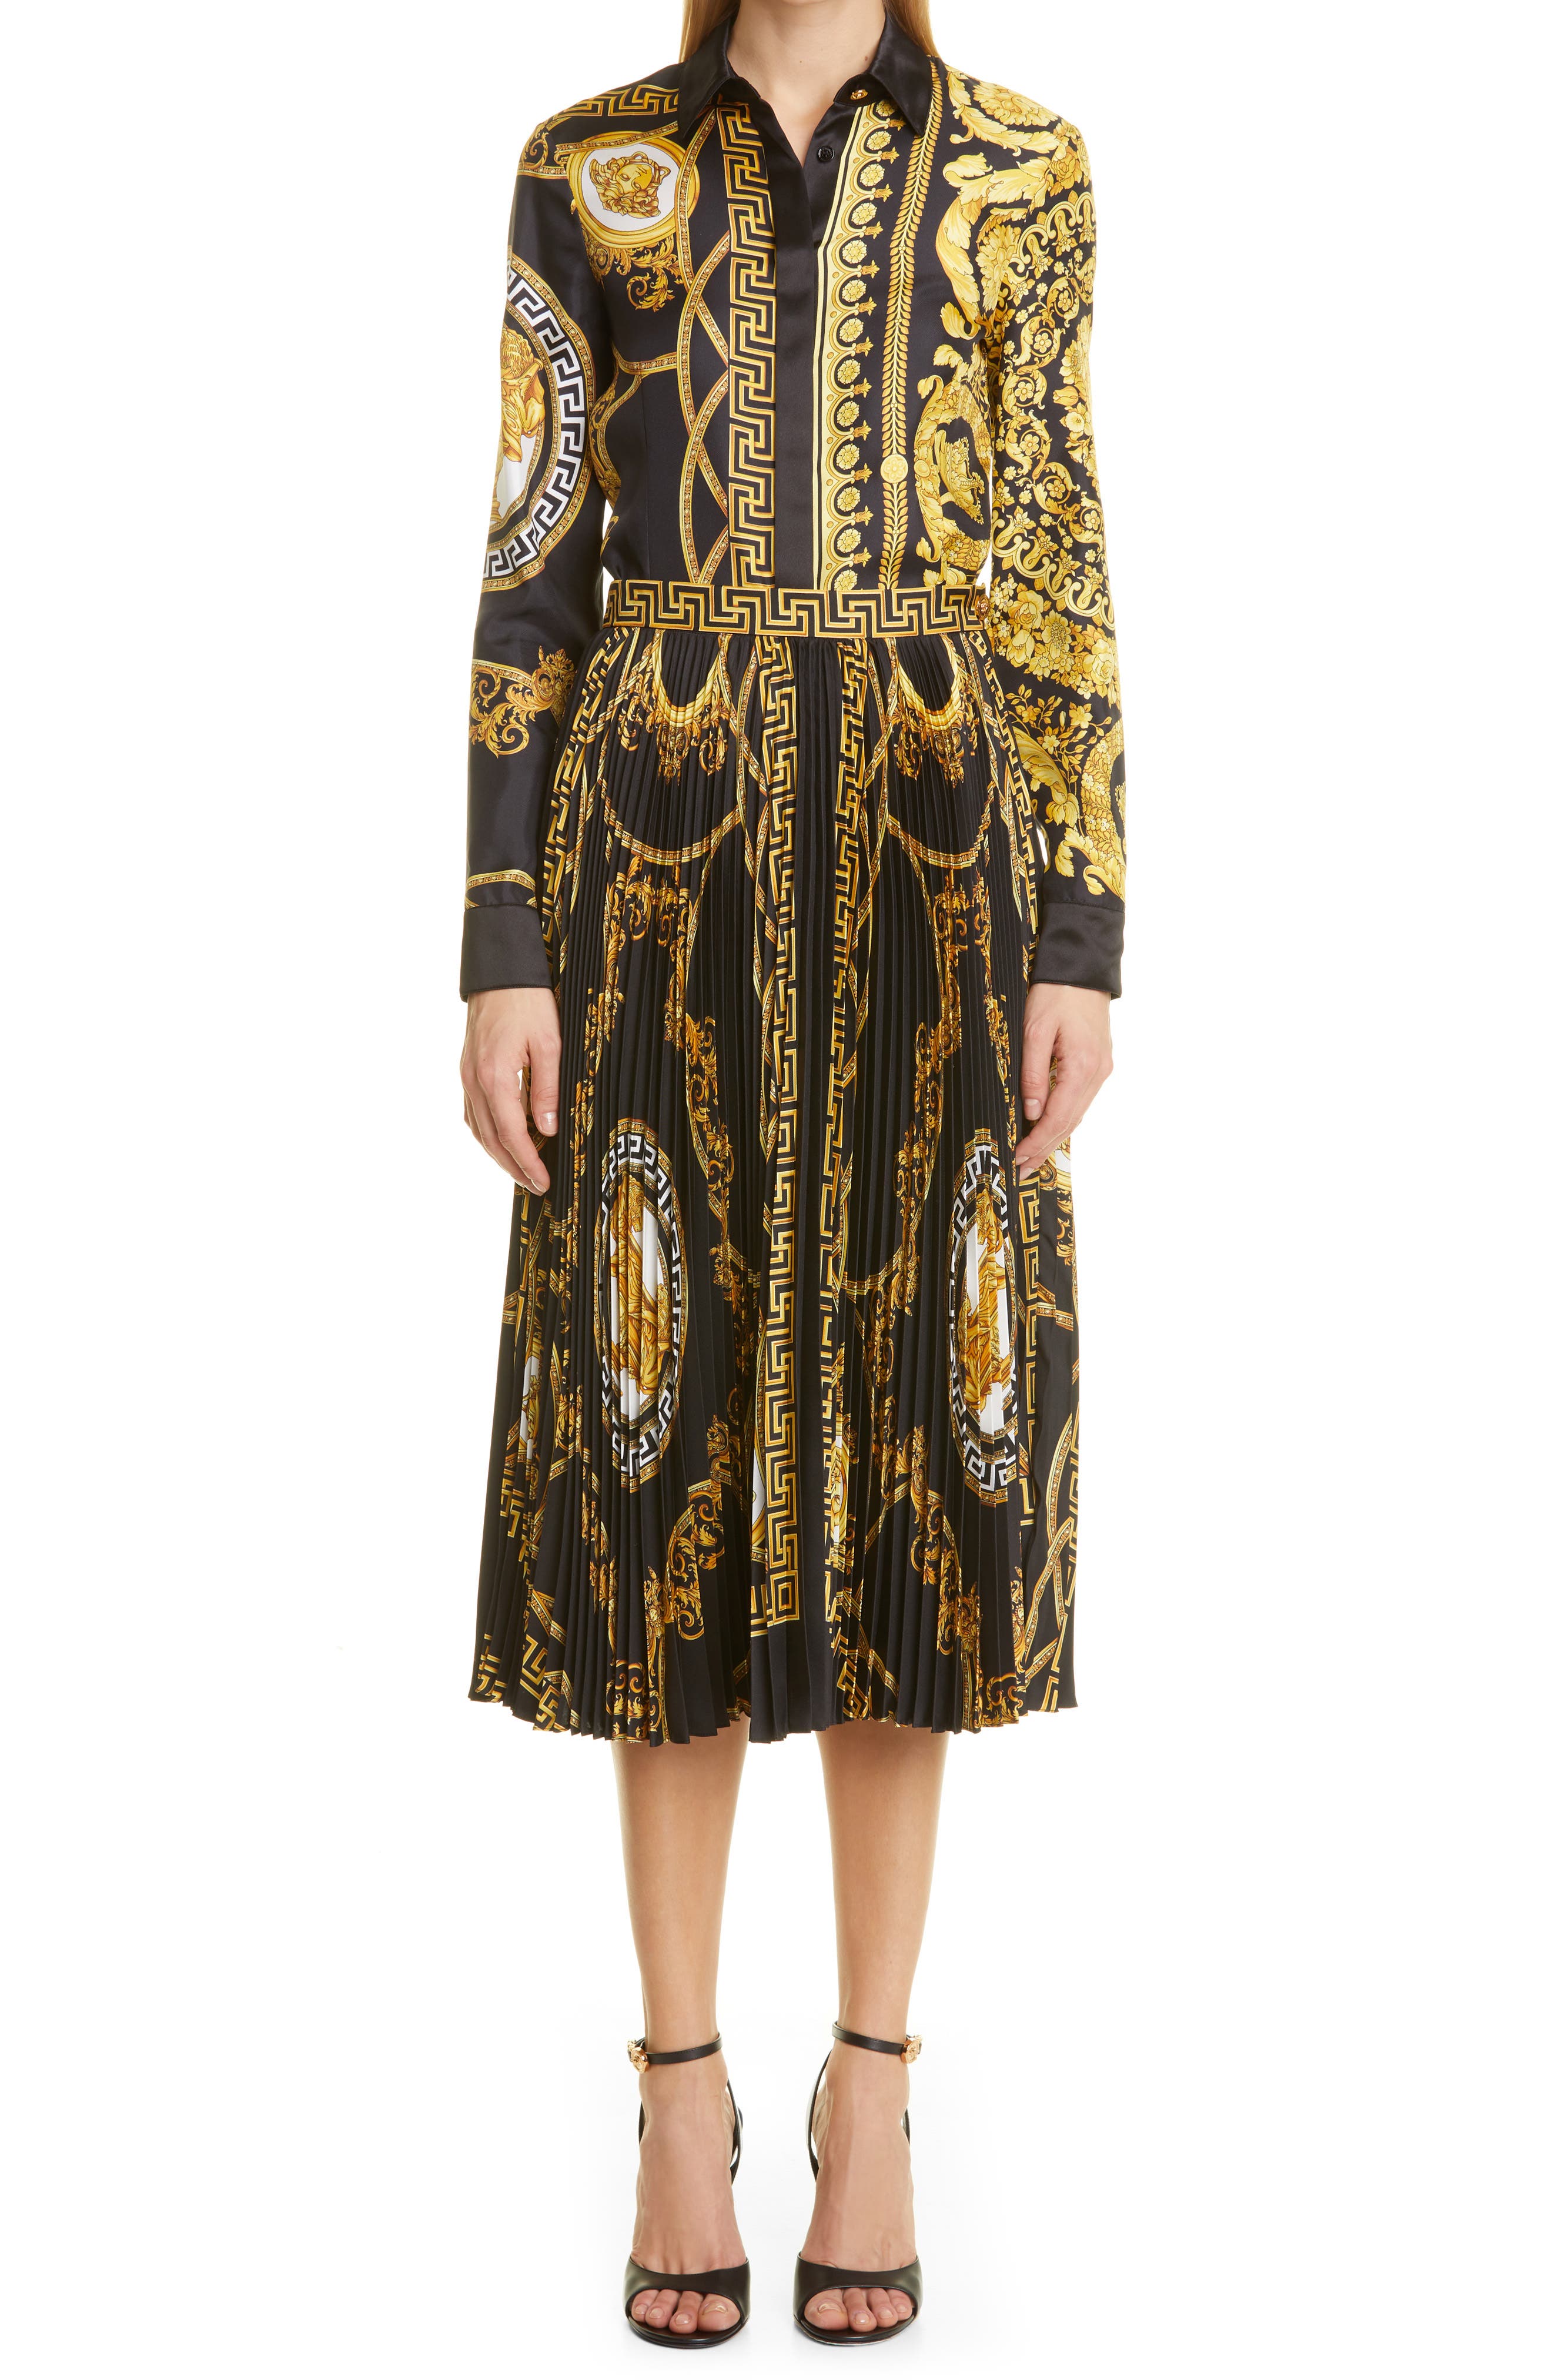 Versace La Coupe des Dieux Barocco Print Silk Twill Blouse in Black-Gold at Nordstrom, Size 4 Us